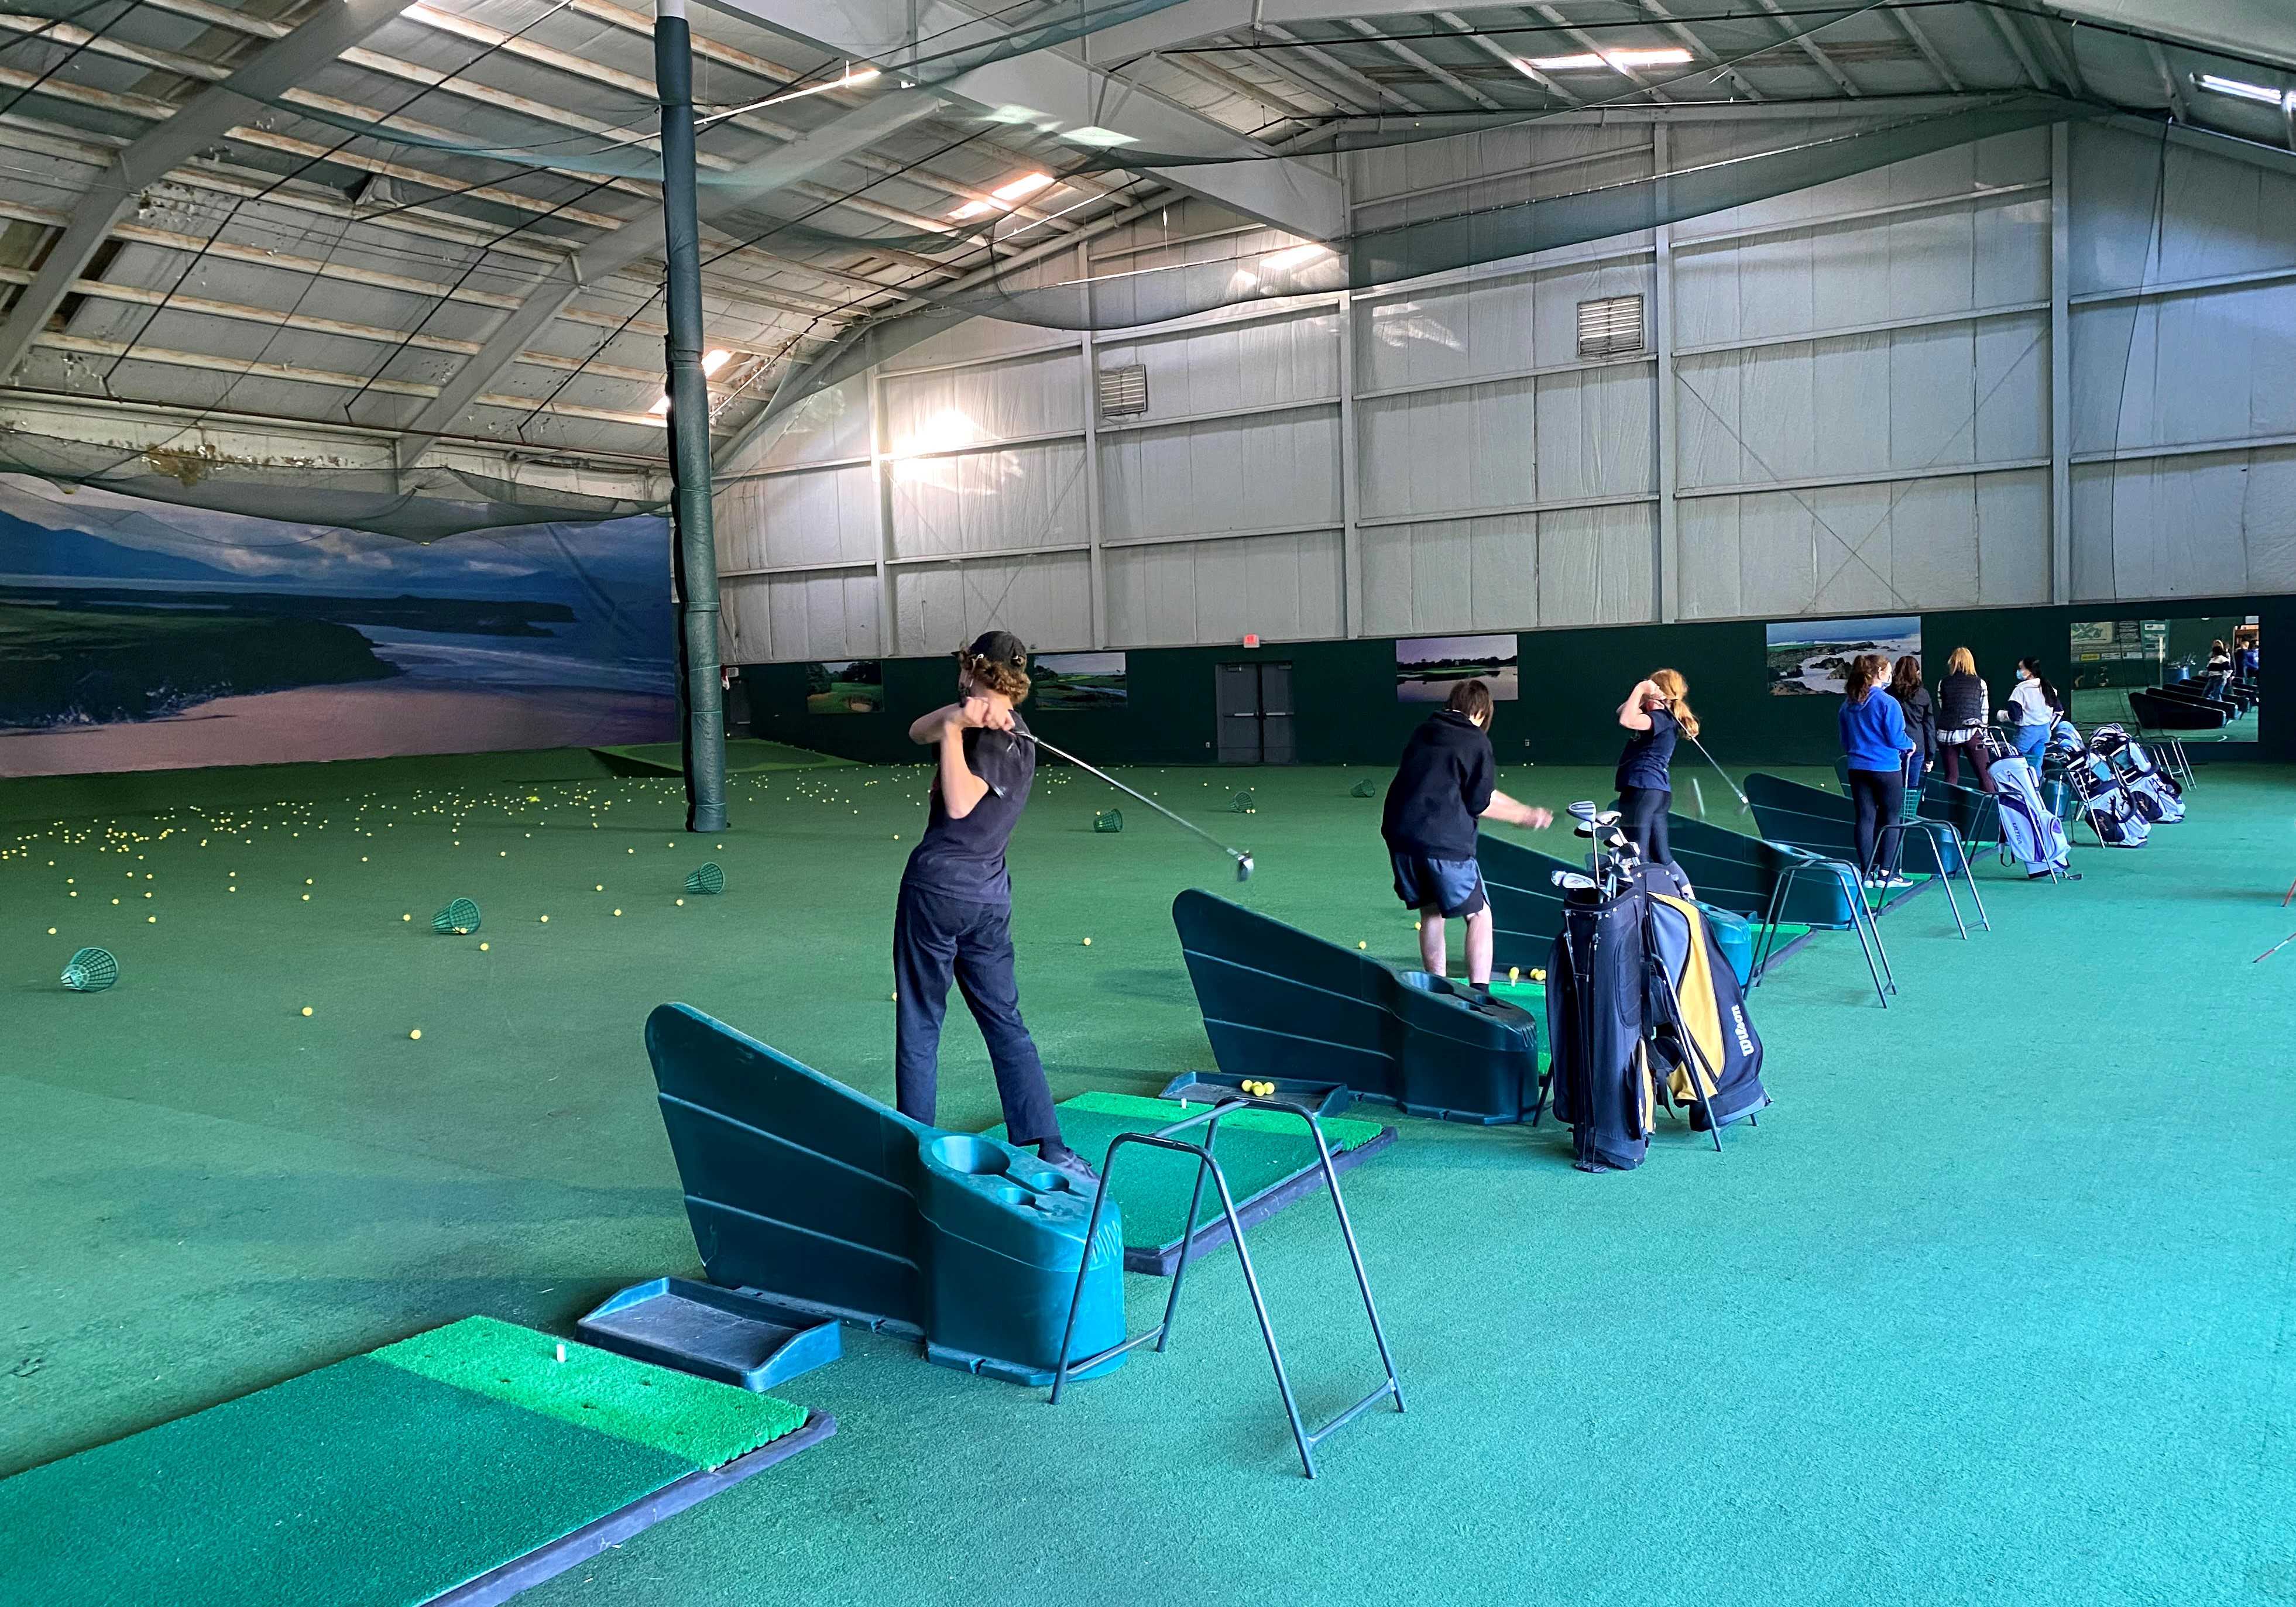 Students practice at the indoor driving range at Chinook Winds Golf Resort on Wednesday in Lincoln City.